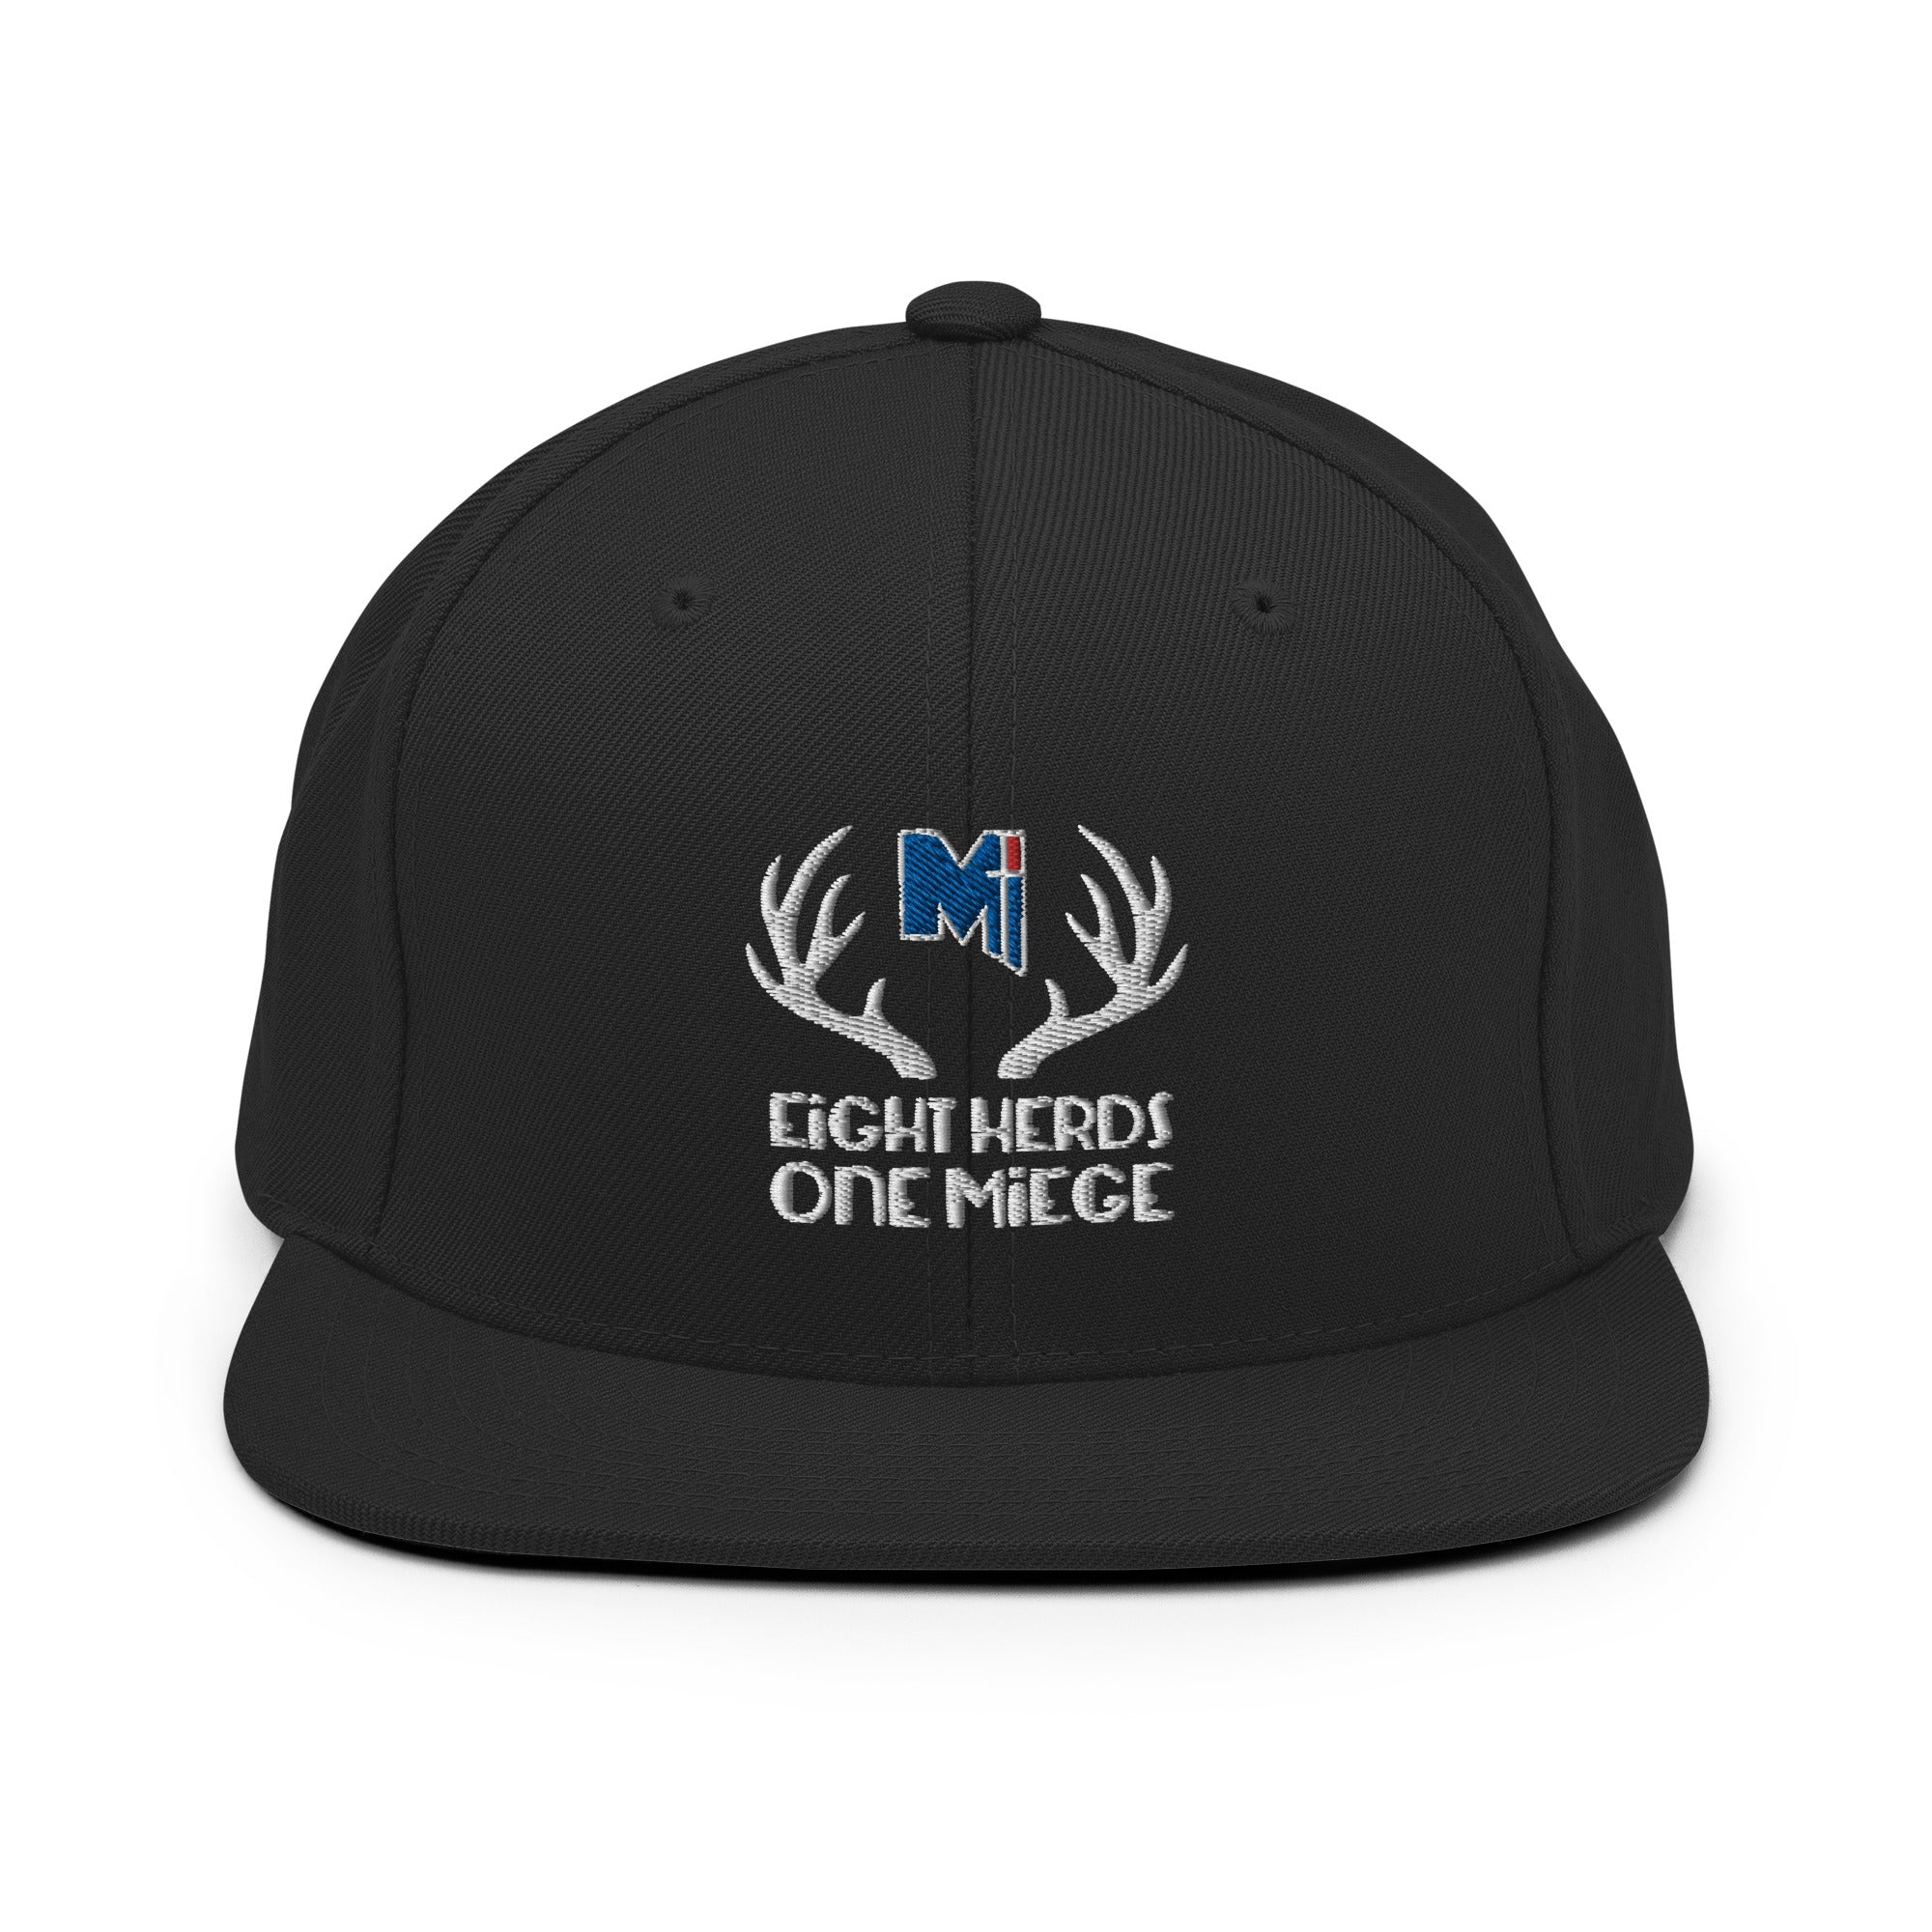 Eight Herds, One Miege Snapback Hat